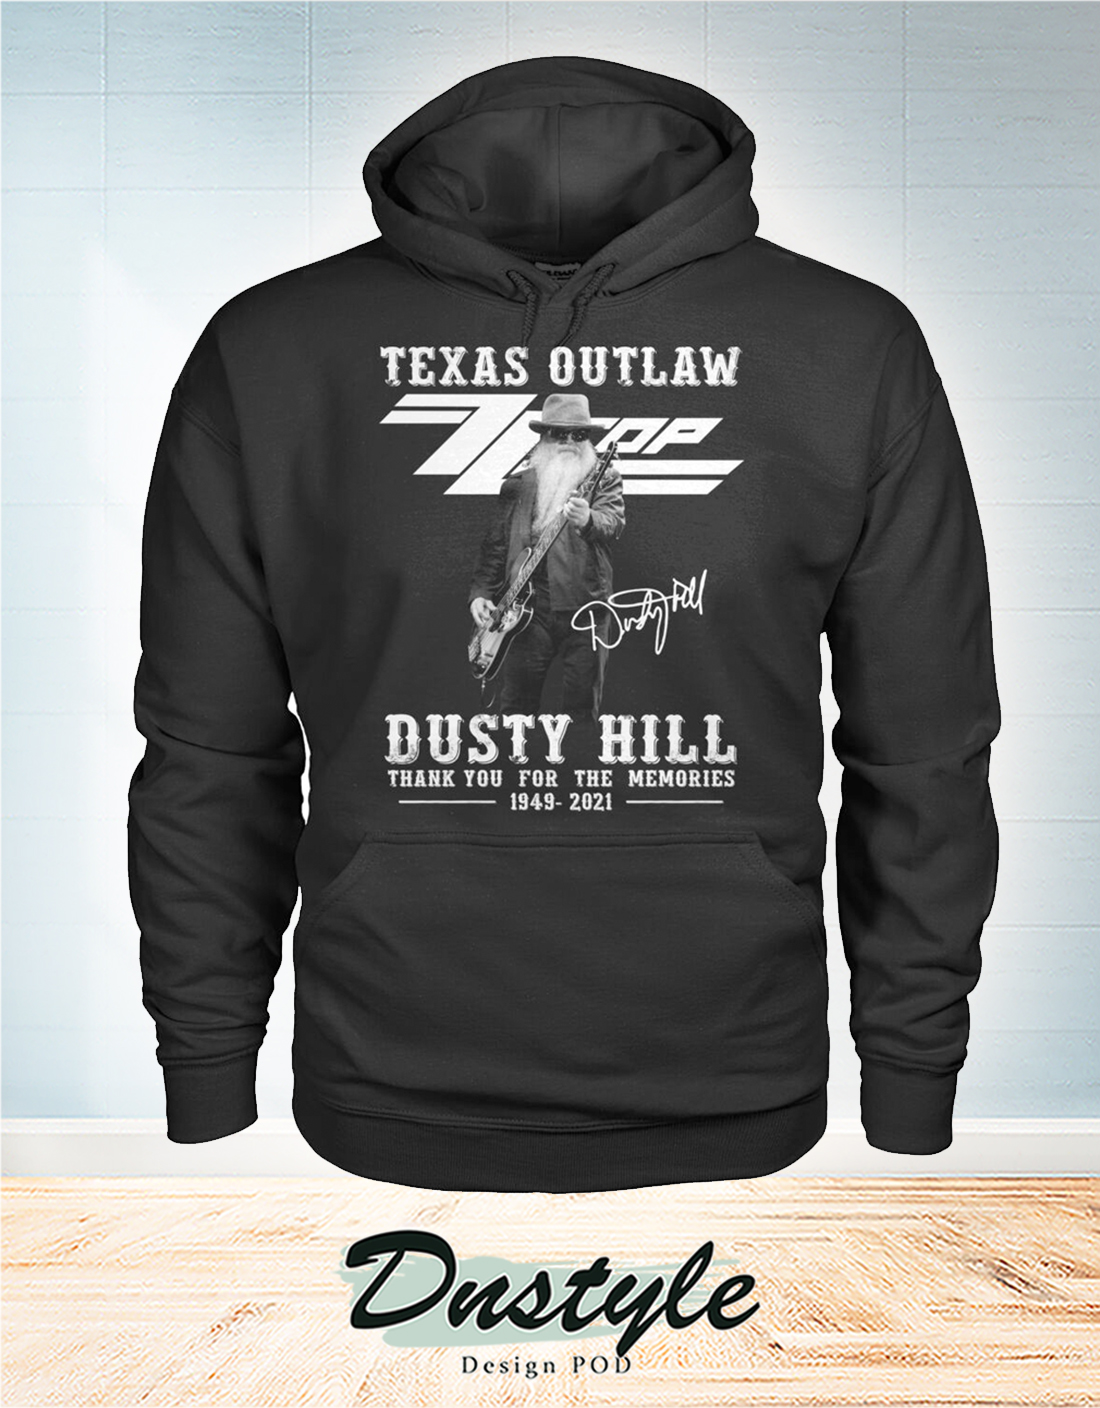 Texas outlaw ZZ Top dusty hill thank you for the memories hoodie